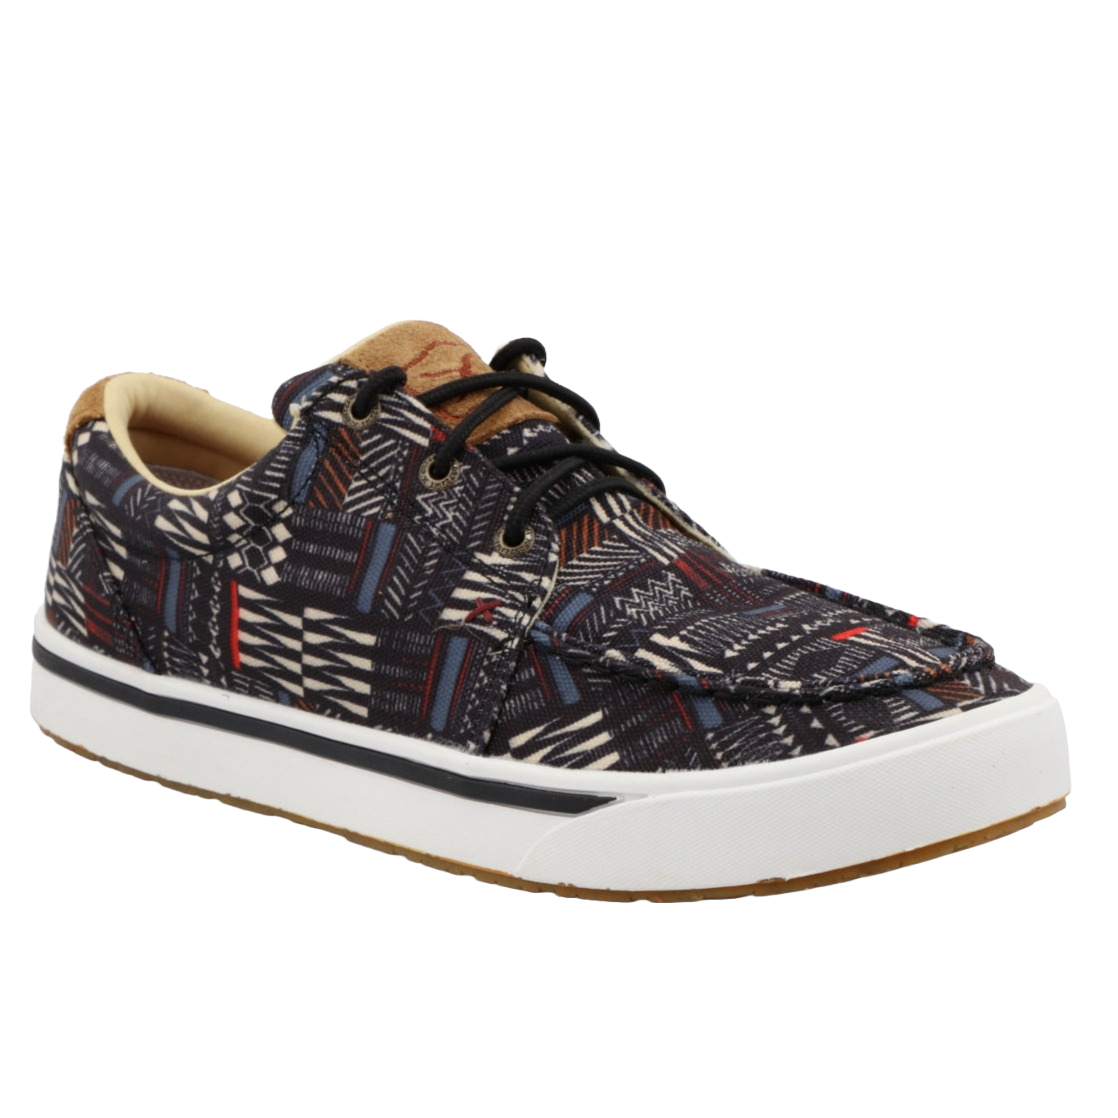 Twisted X® Men's Multi All-Over Print Colored Lace Up Shoes MCA0051